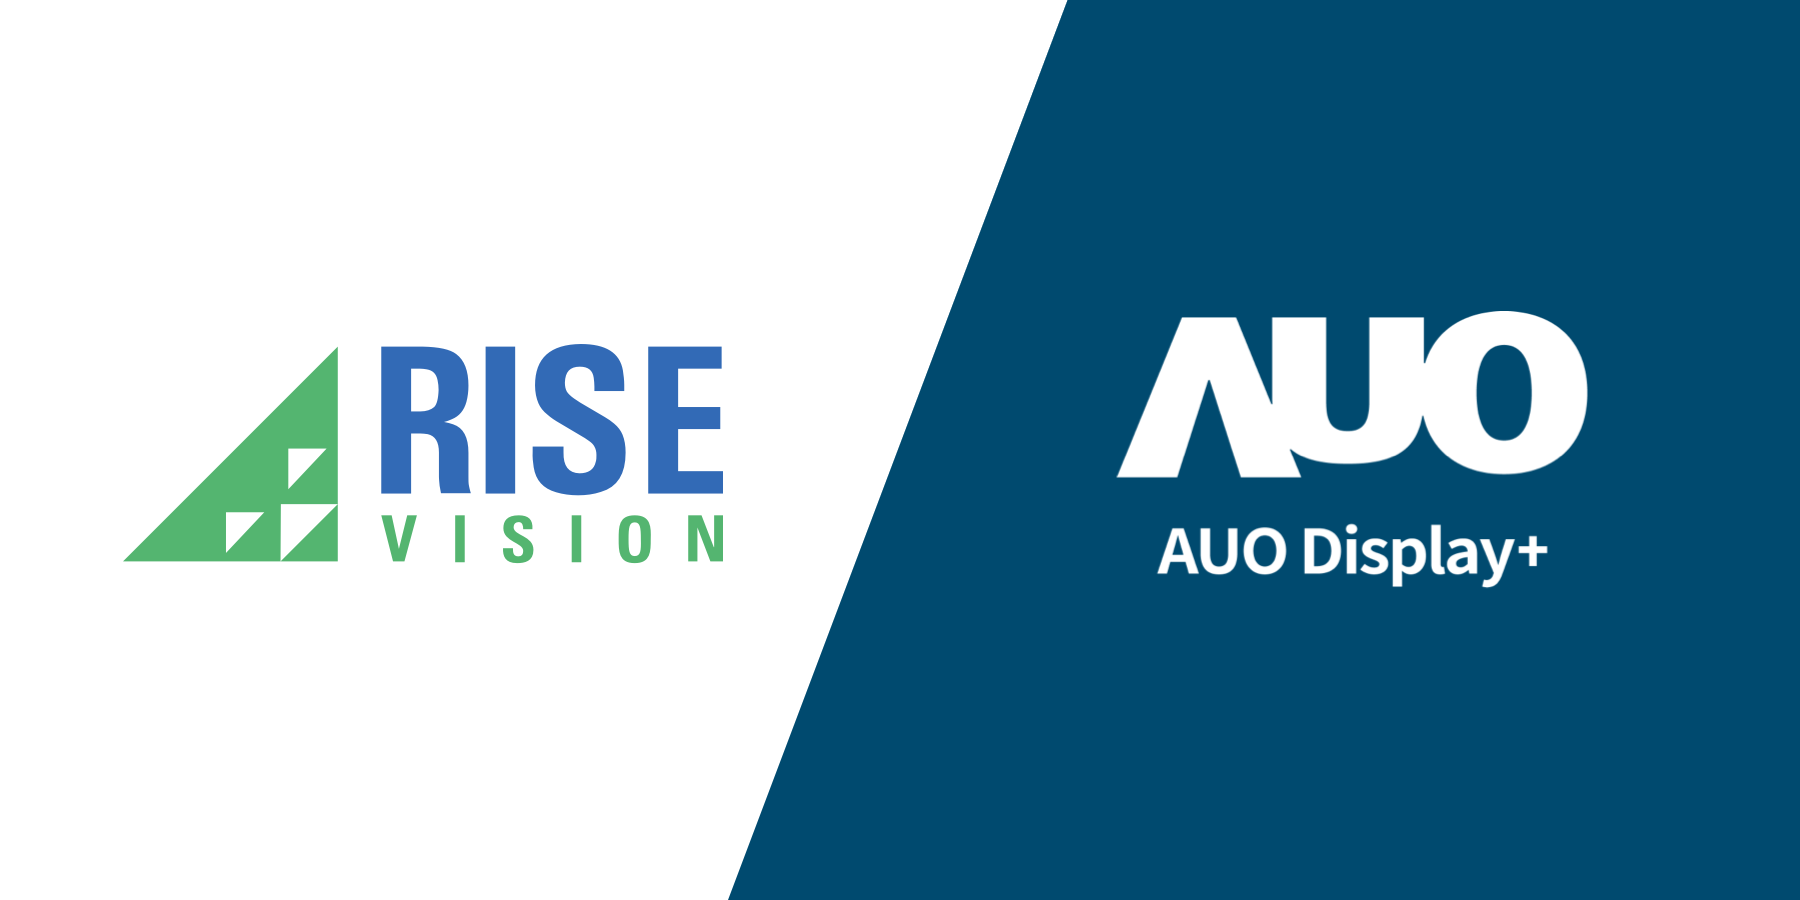 Rise Vision logo and AUO Display Plus logo